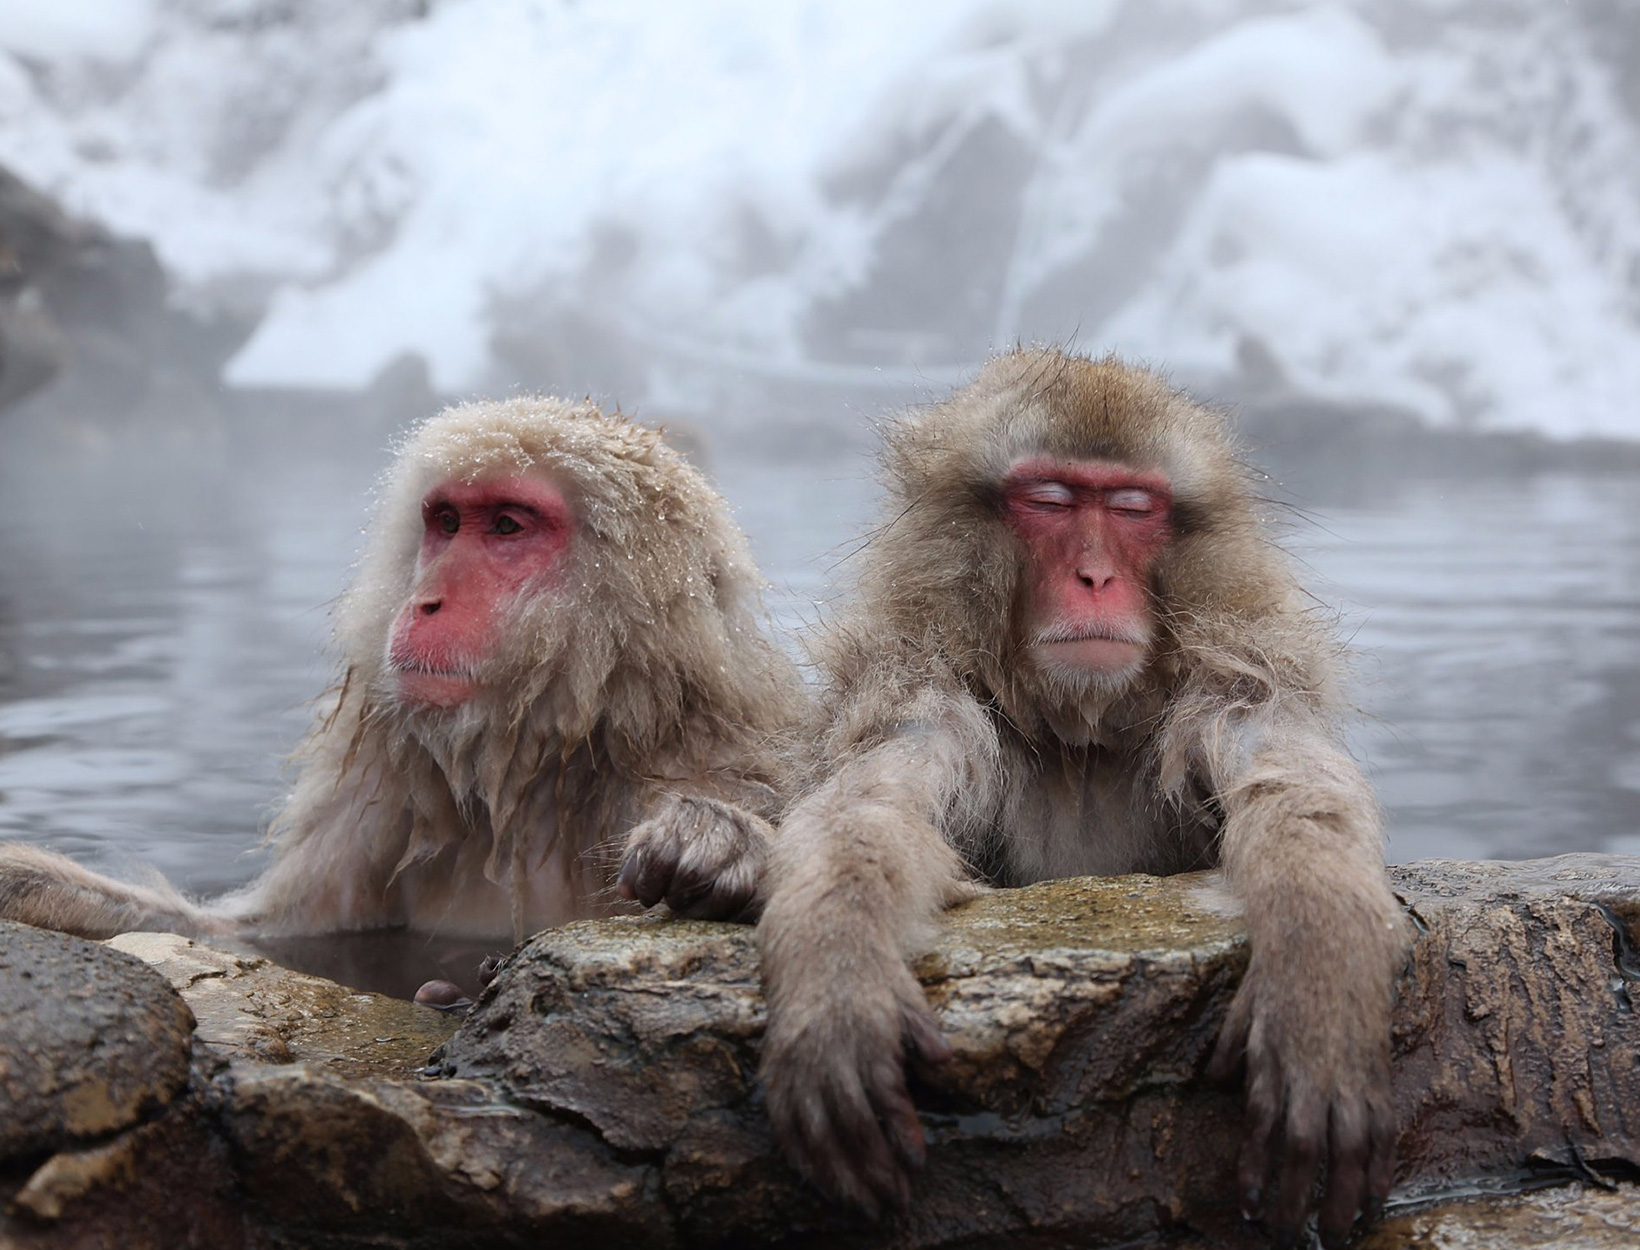 Snow Monkeys Can De-stress by Taking Hot Baths — Just Like Humans